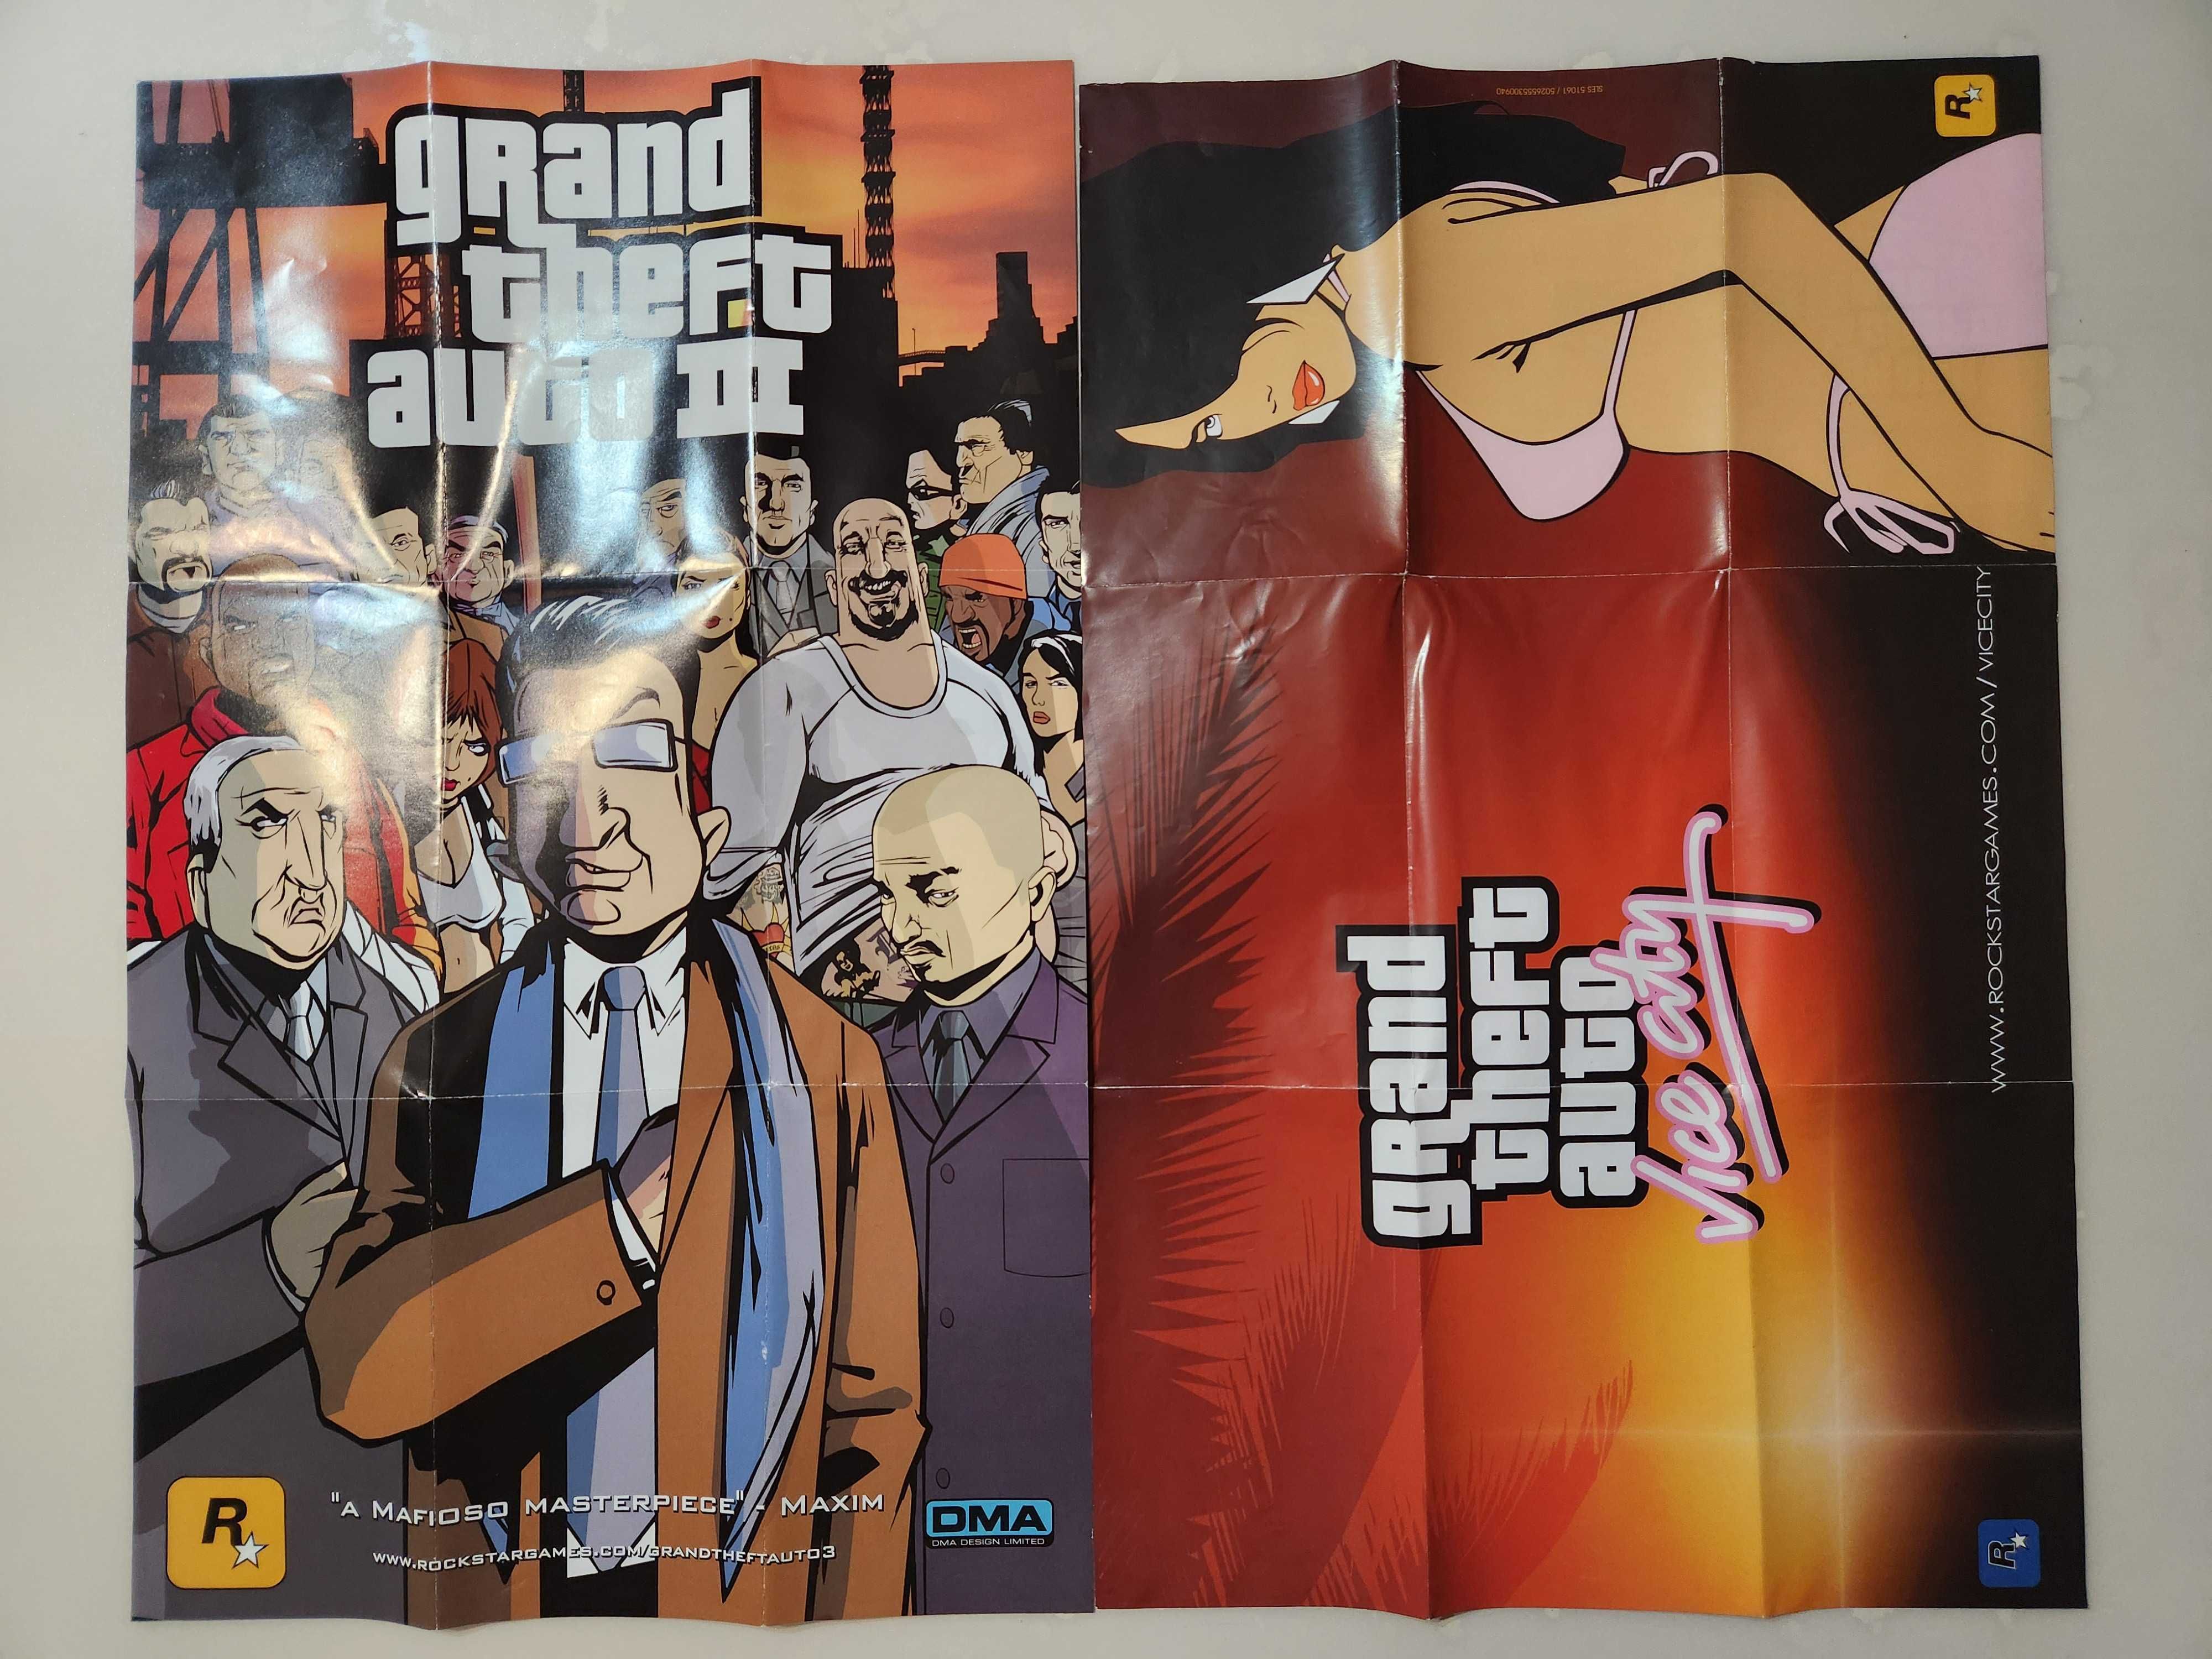 Grand Theft Auto III, Vice City si San Andreas pt. PlayStation 2 (PS2)